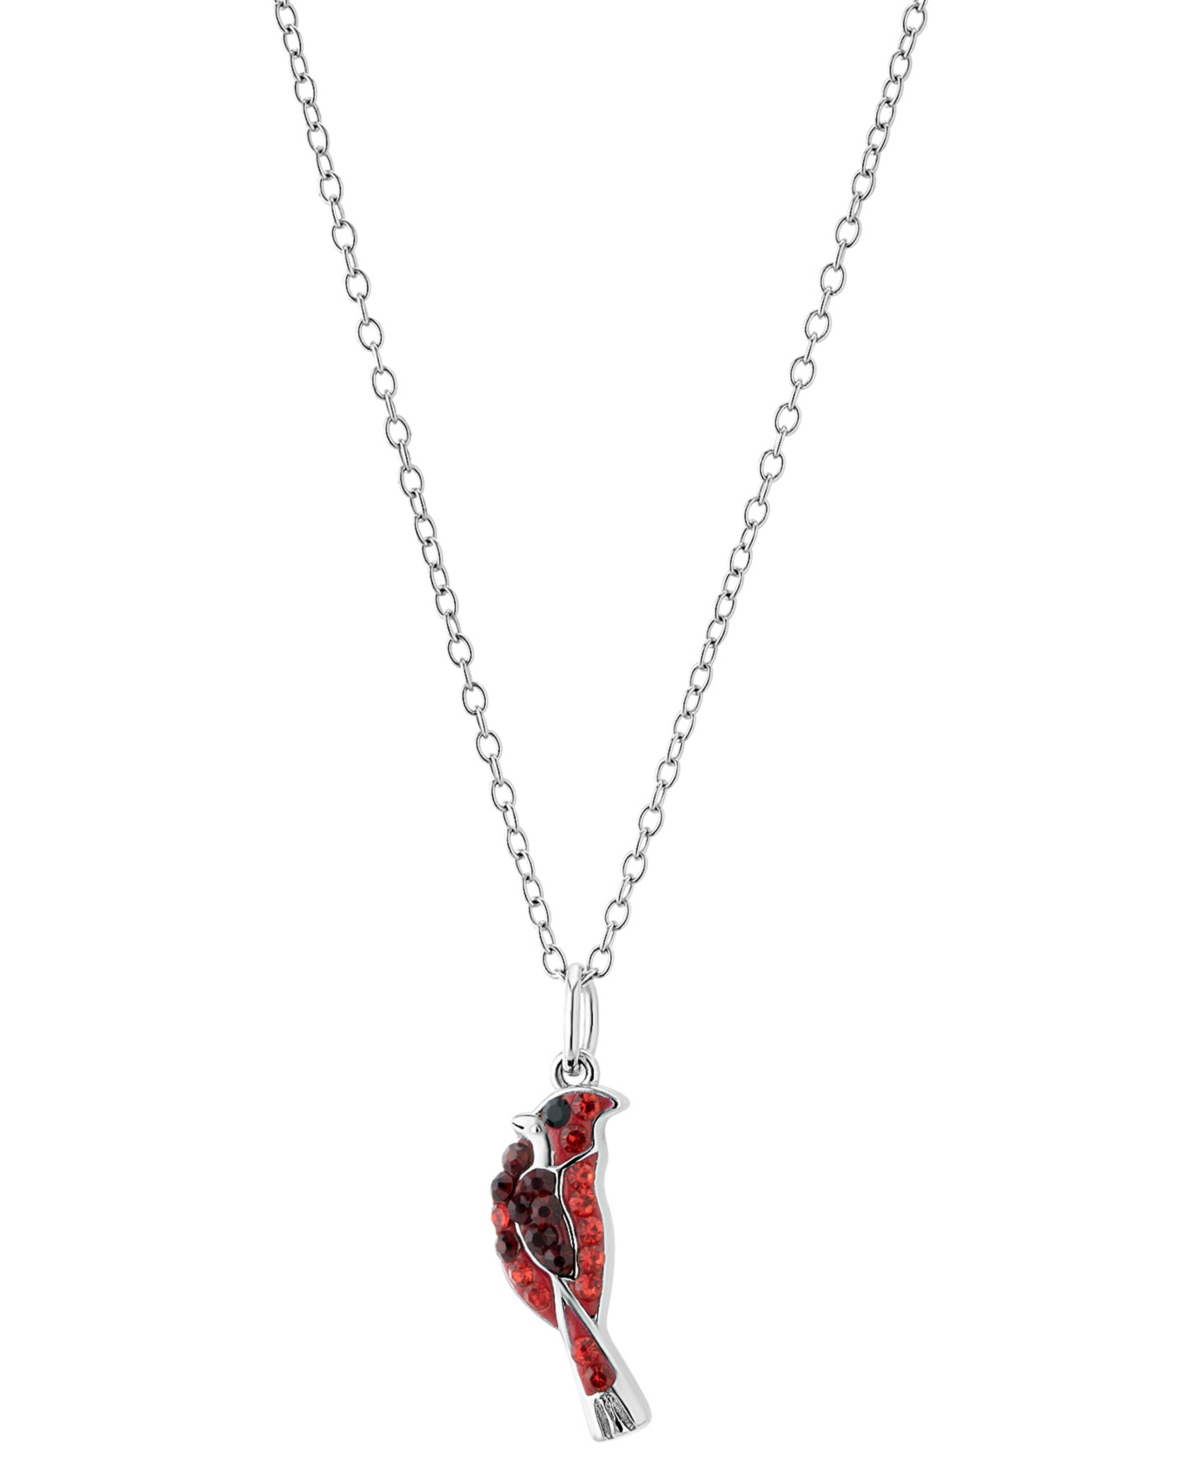 Giani Bernini Crystal Cardinal Pendant Necklace In Sterling Silver, 16" + 2" Extender, Created For Macy's In Red